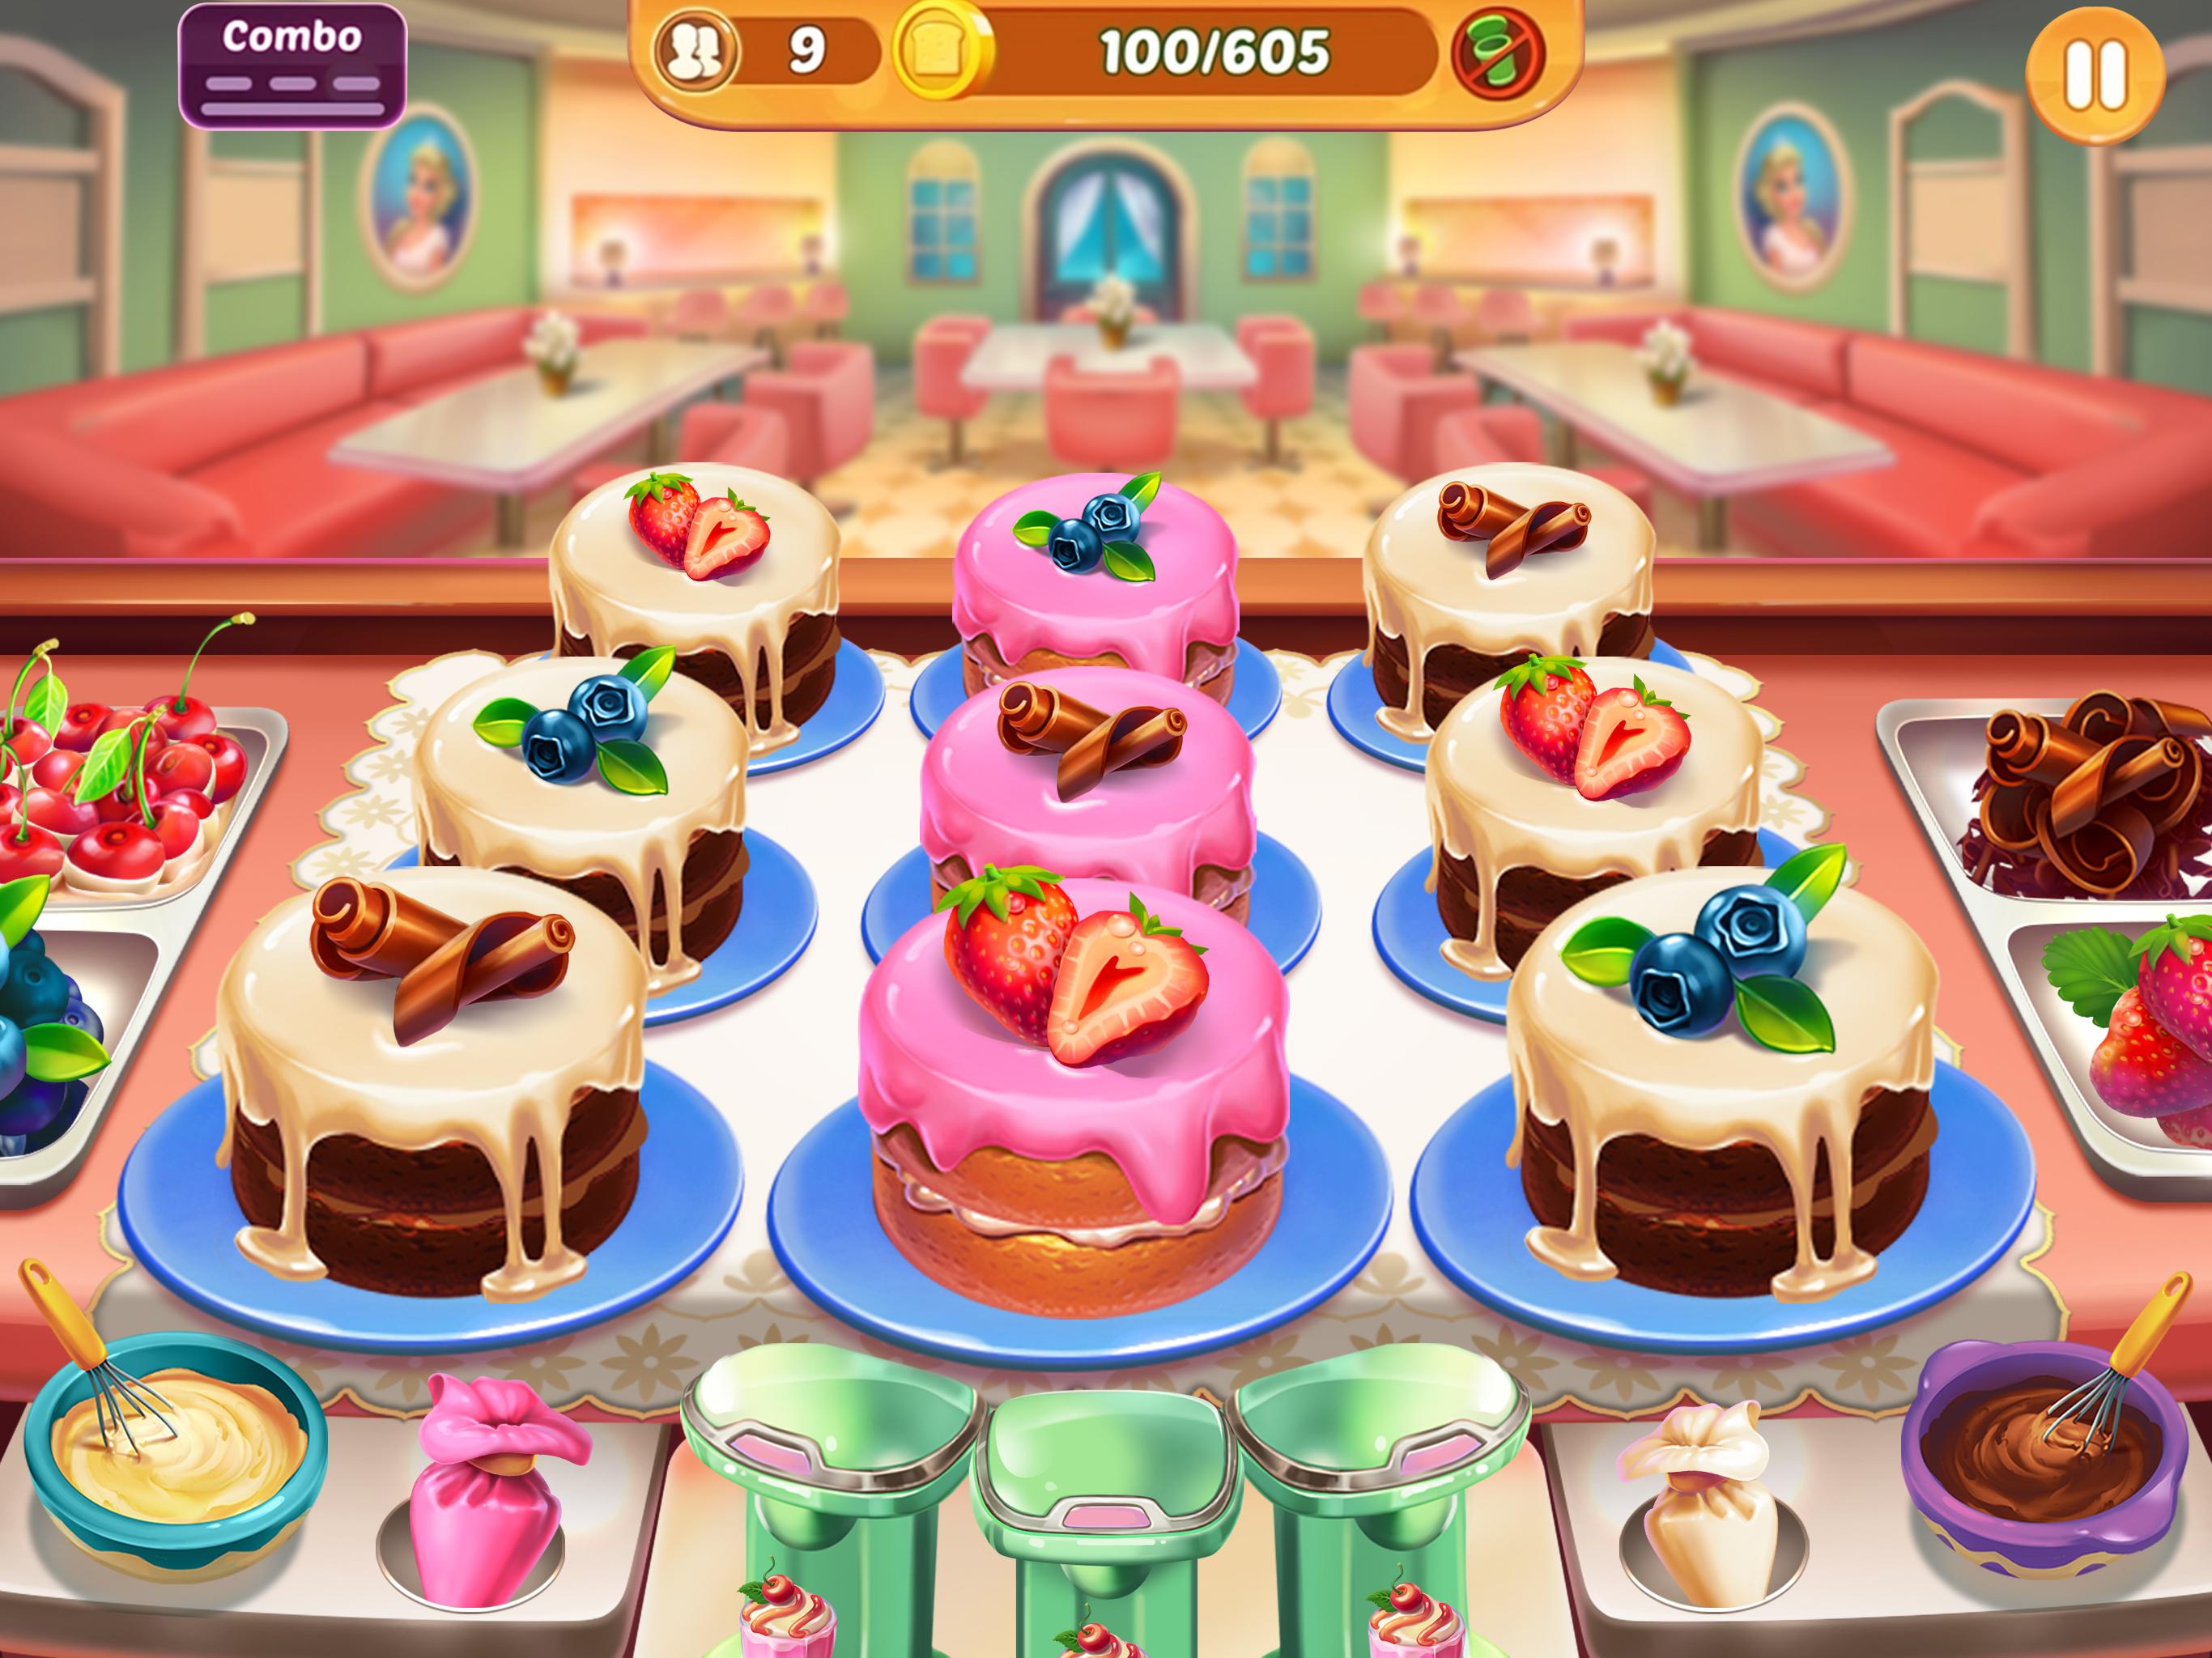 Cooking Crush Cooking Games Madness - Frenzy City 1.2.4 Screenshot 13